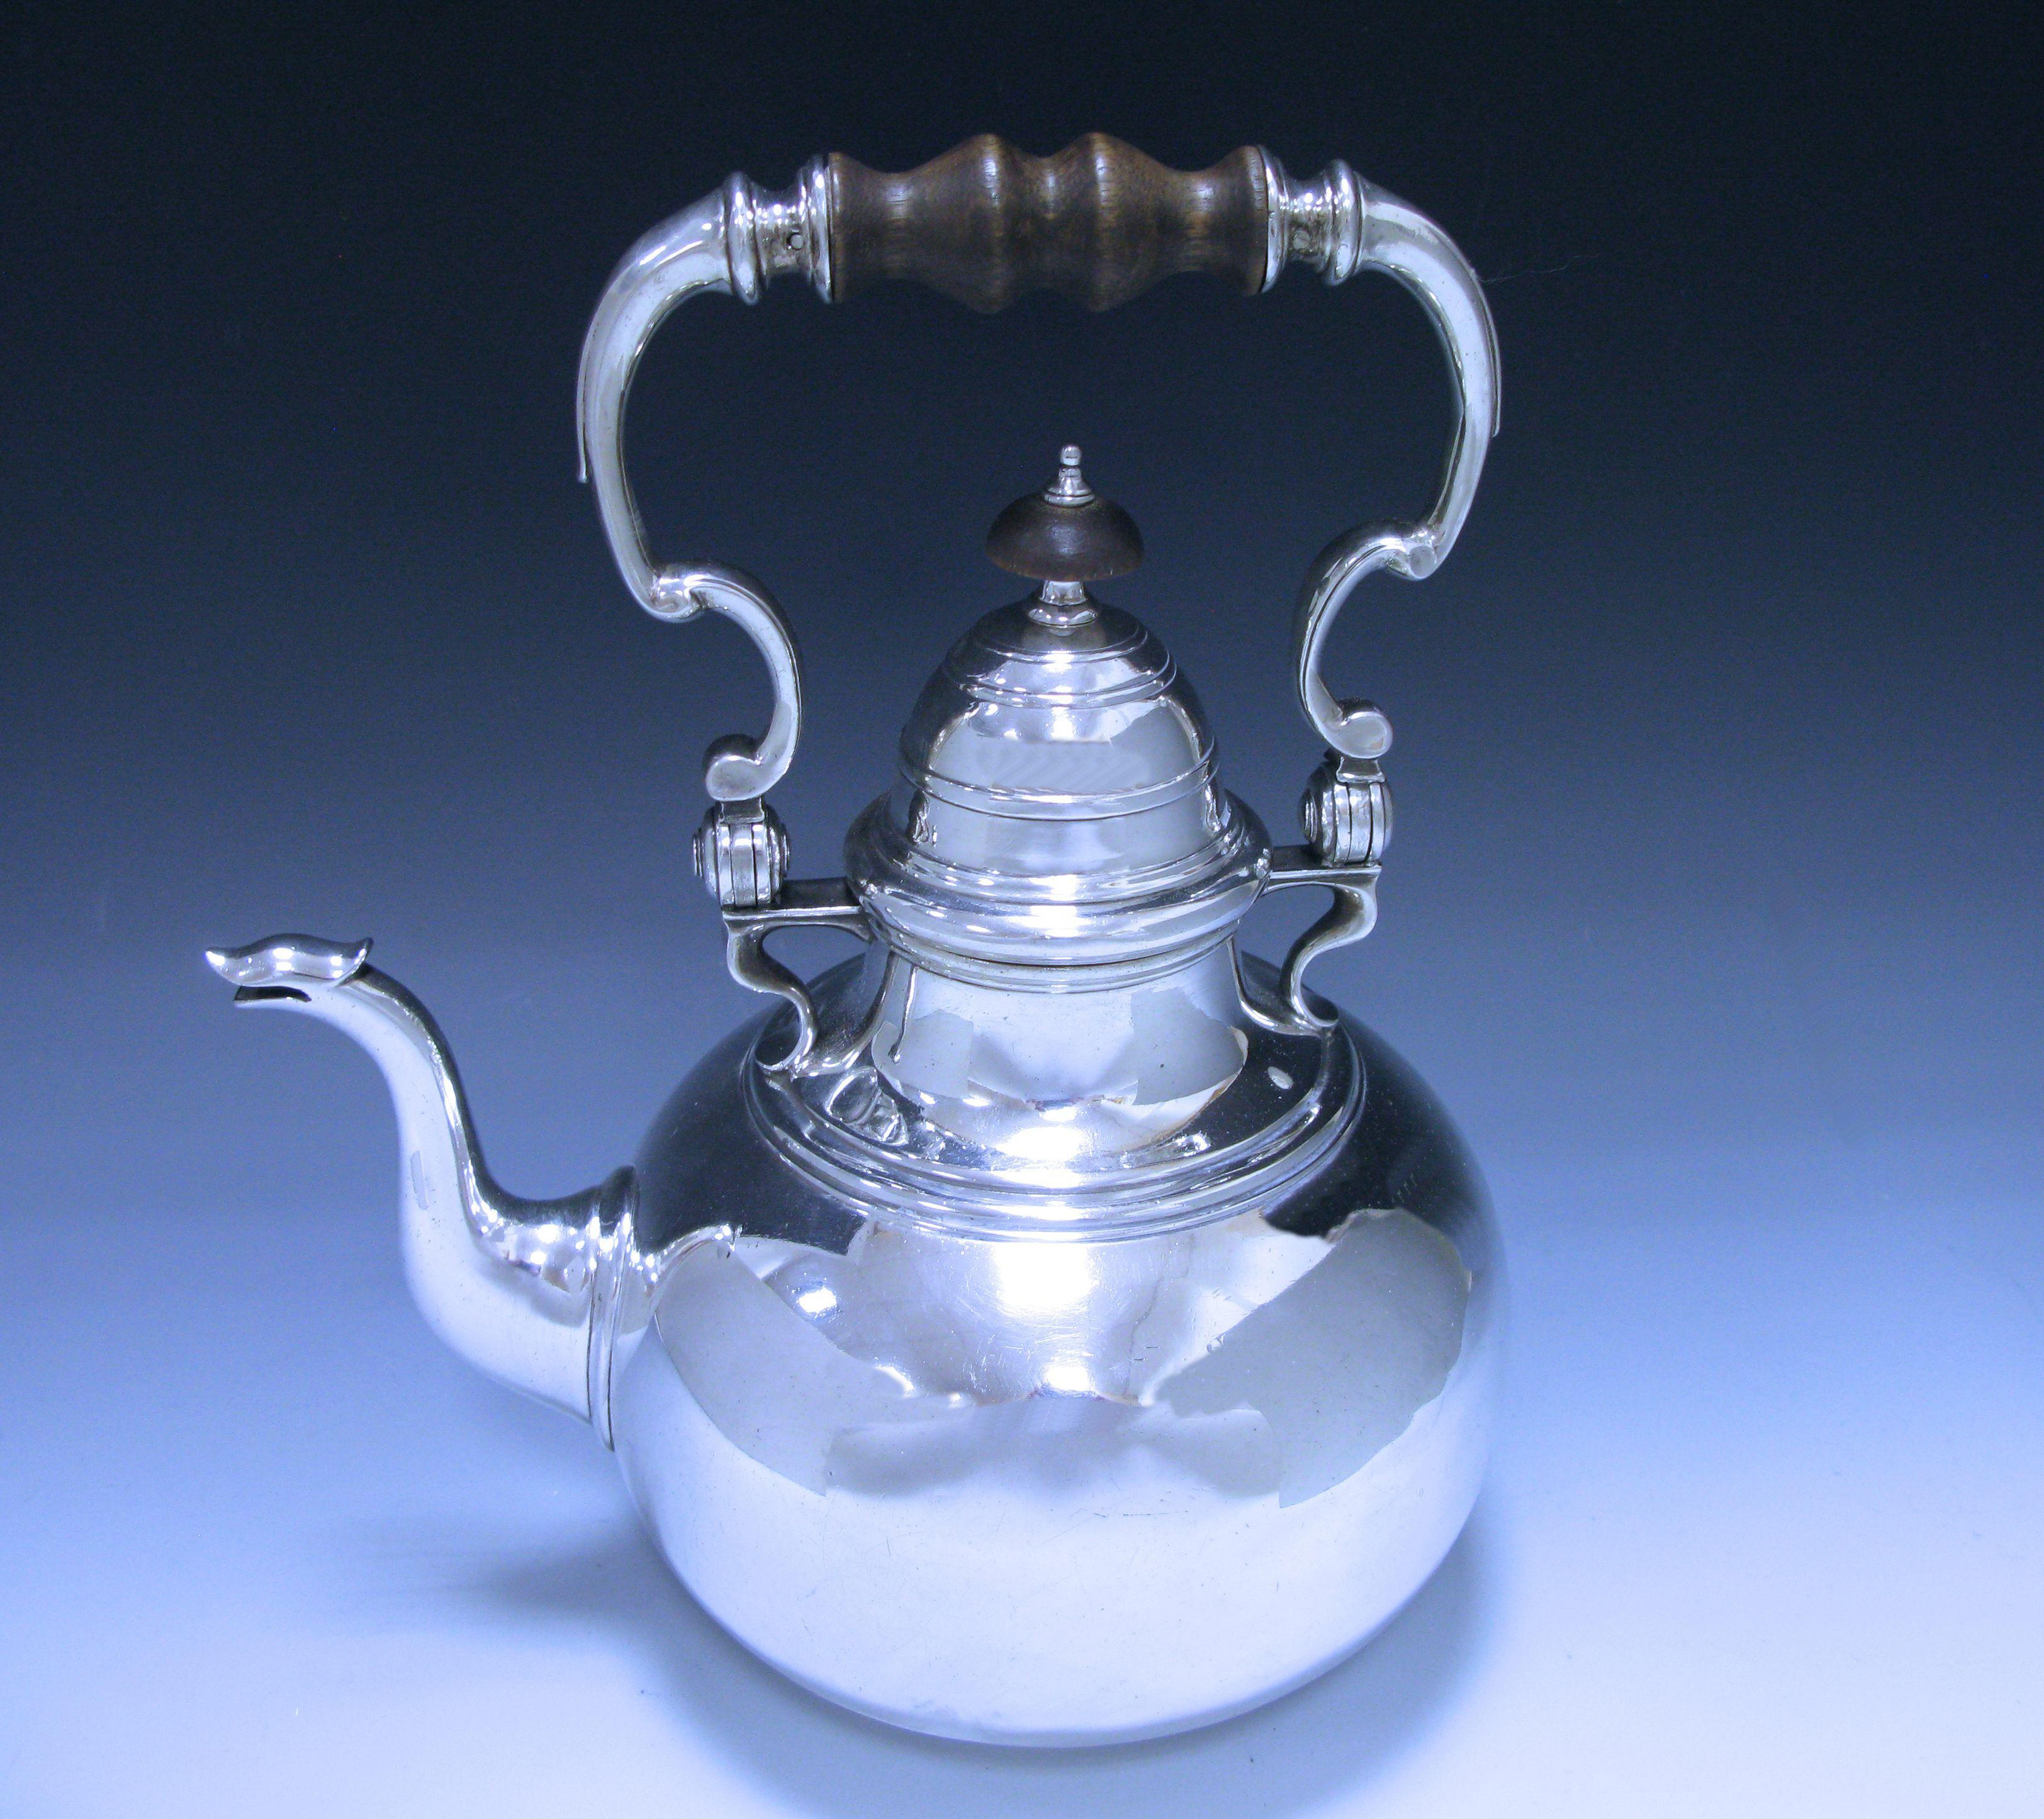 Early 18th Century Queen Anne Silver Tea Kettle on Stand by William Fleming in 1710 For Sale